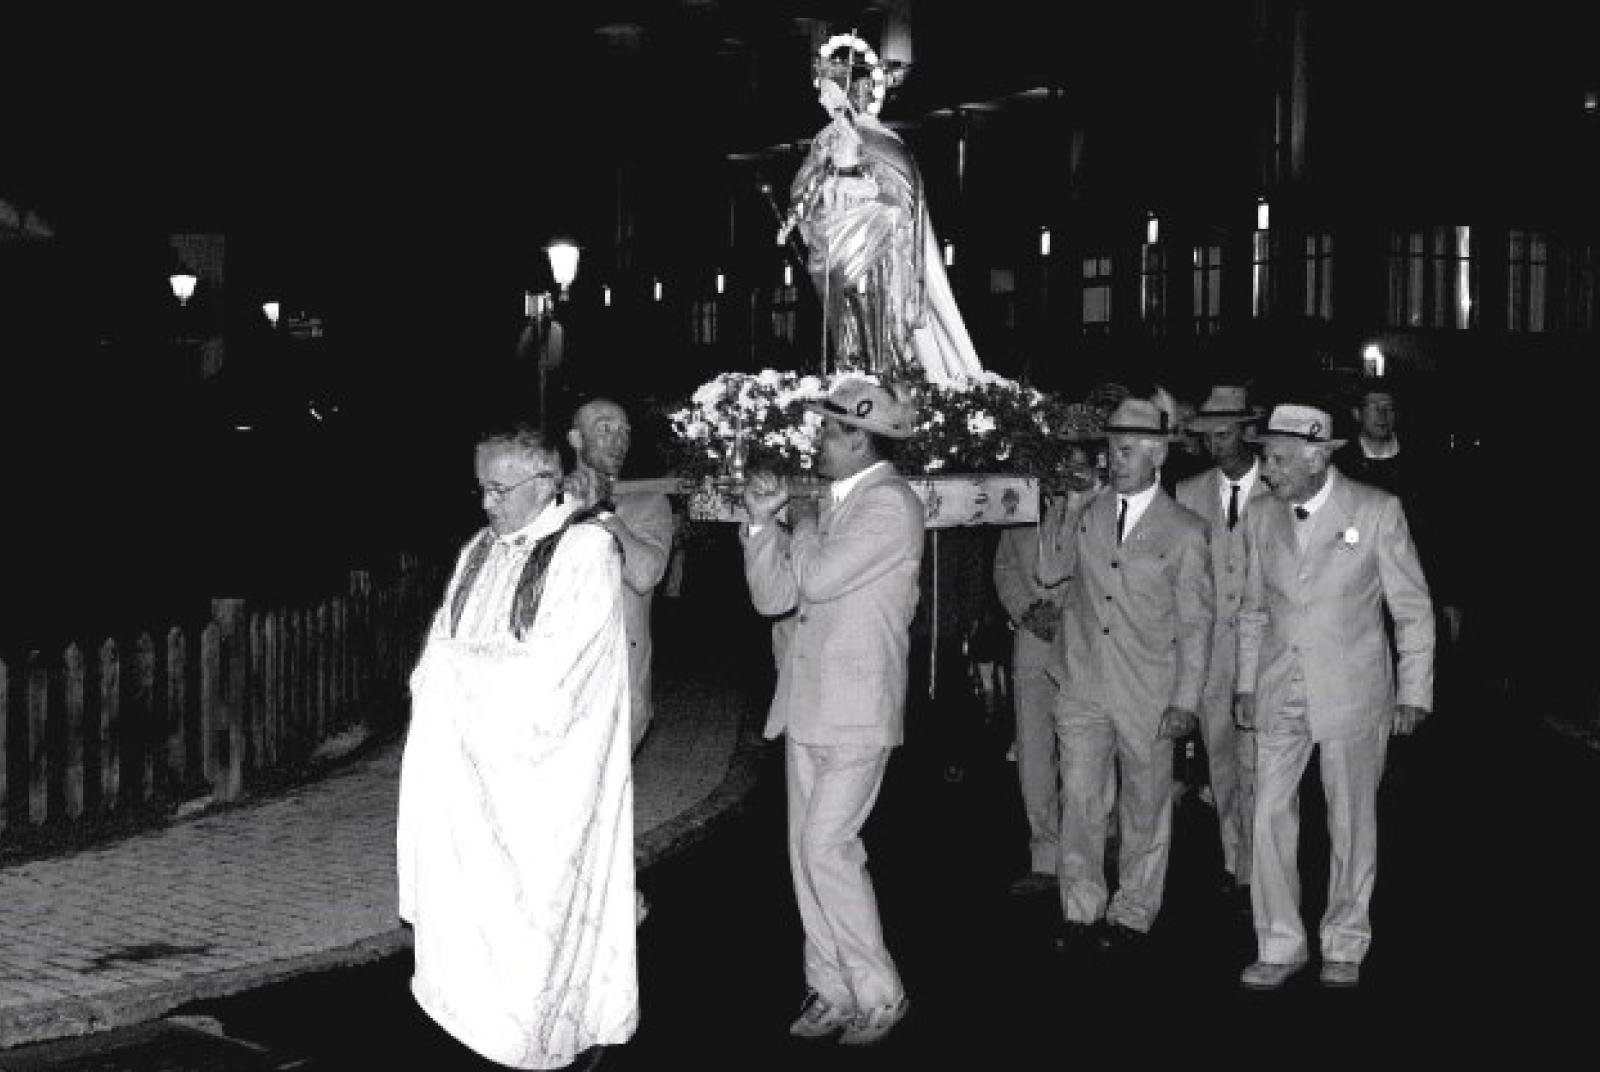 The Assumption procession and Festival of the alpine guides